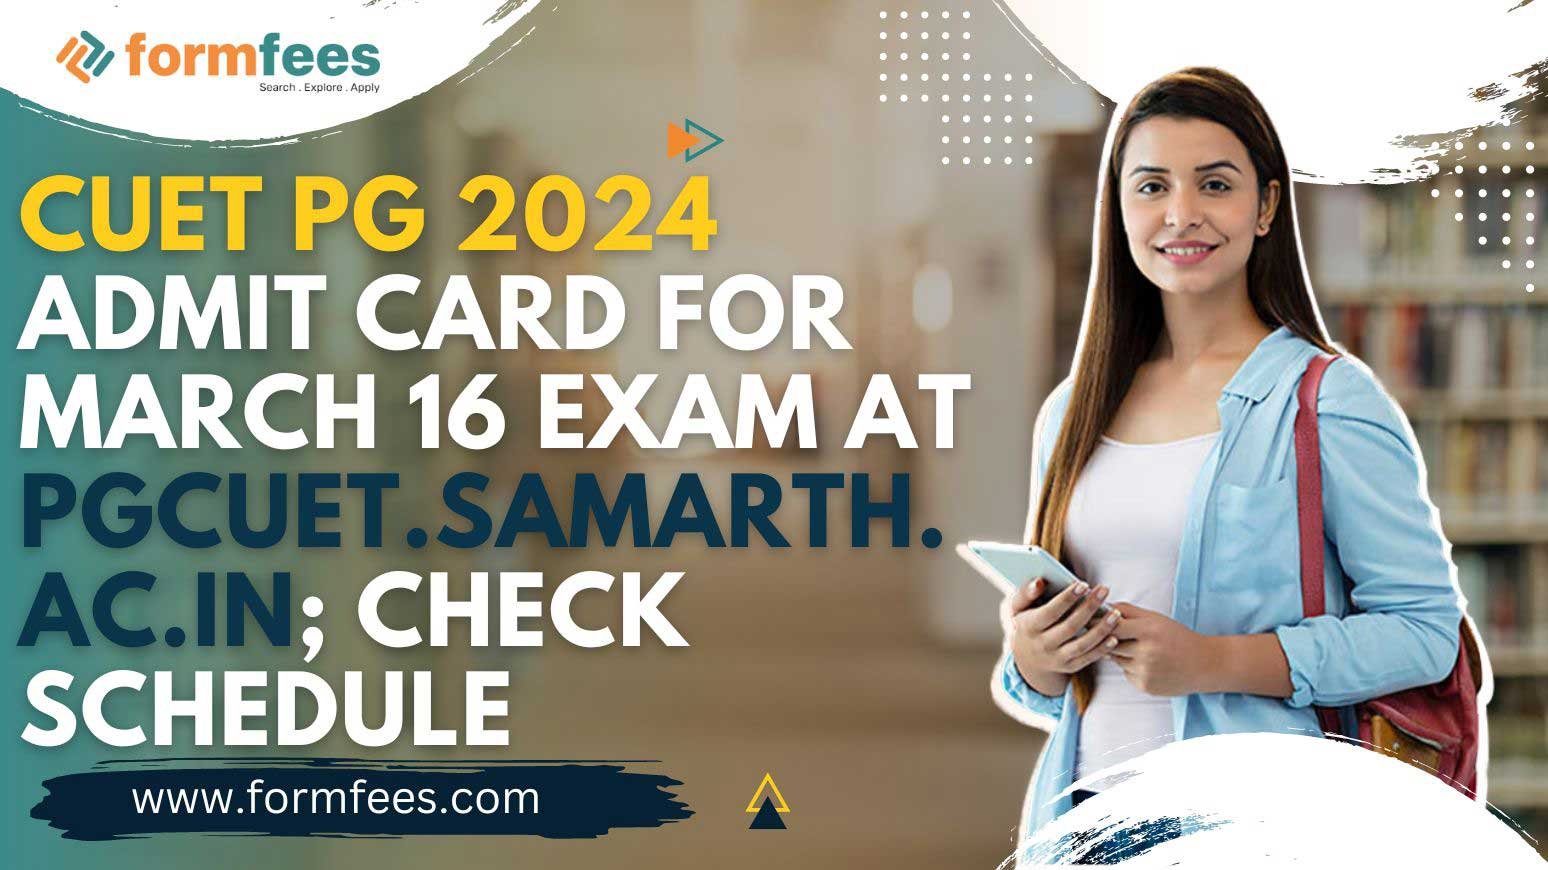 CUET PG 2024 Admit Card for March 16 Exam at pgcuet.samarth.ac.in; Check schedule